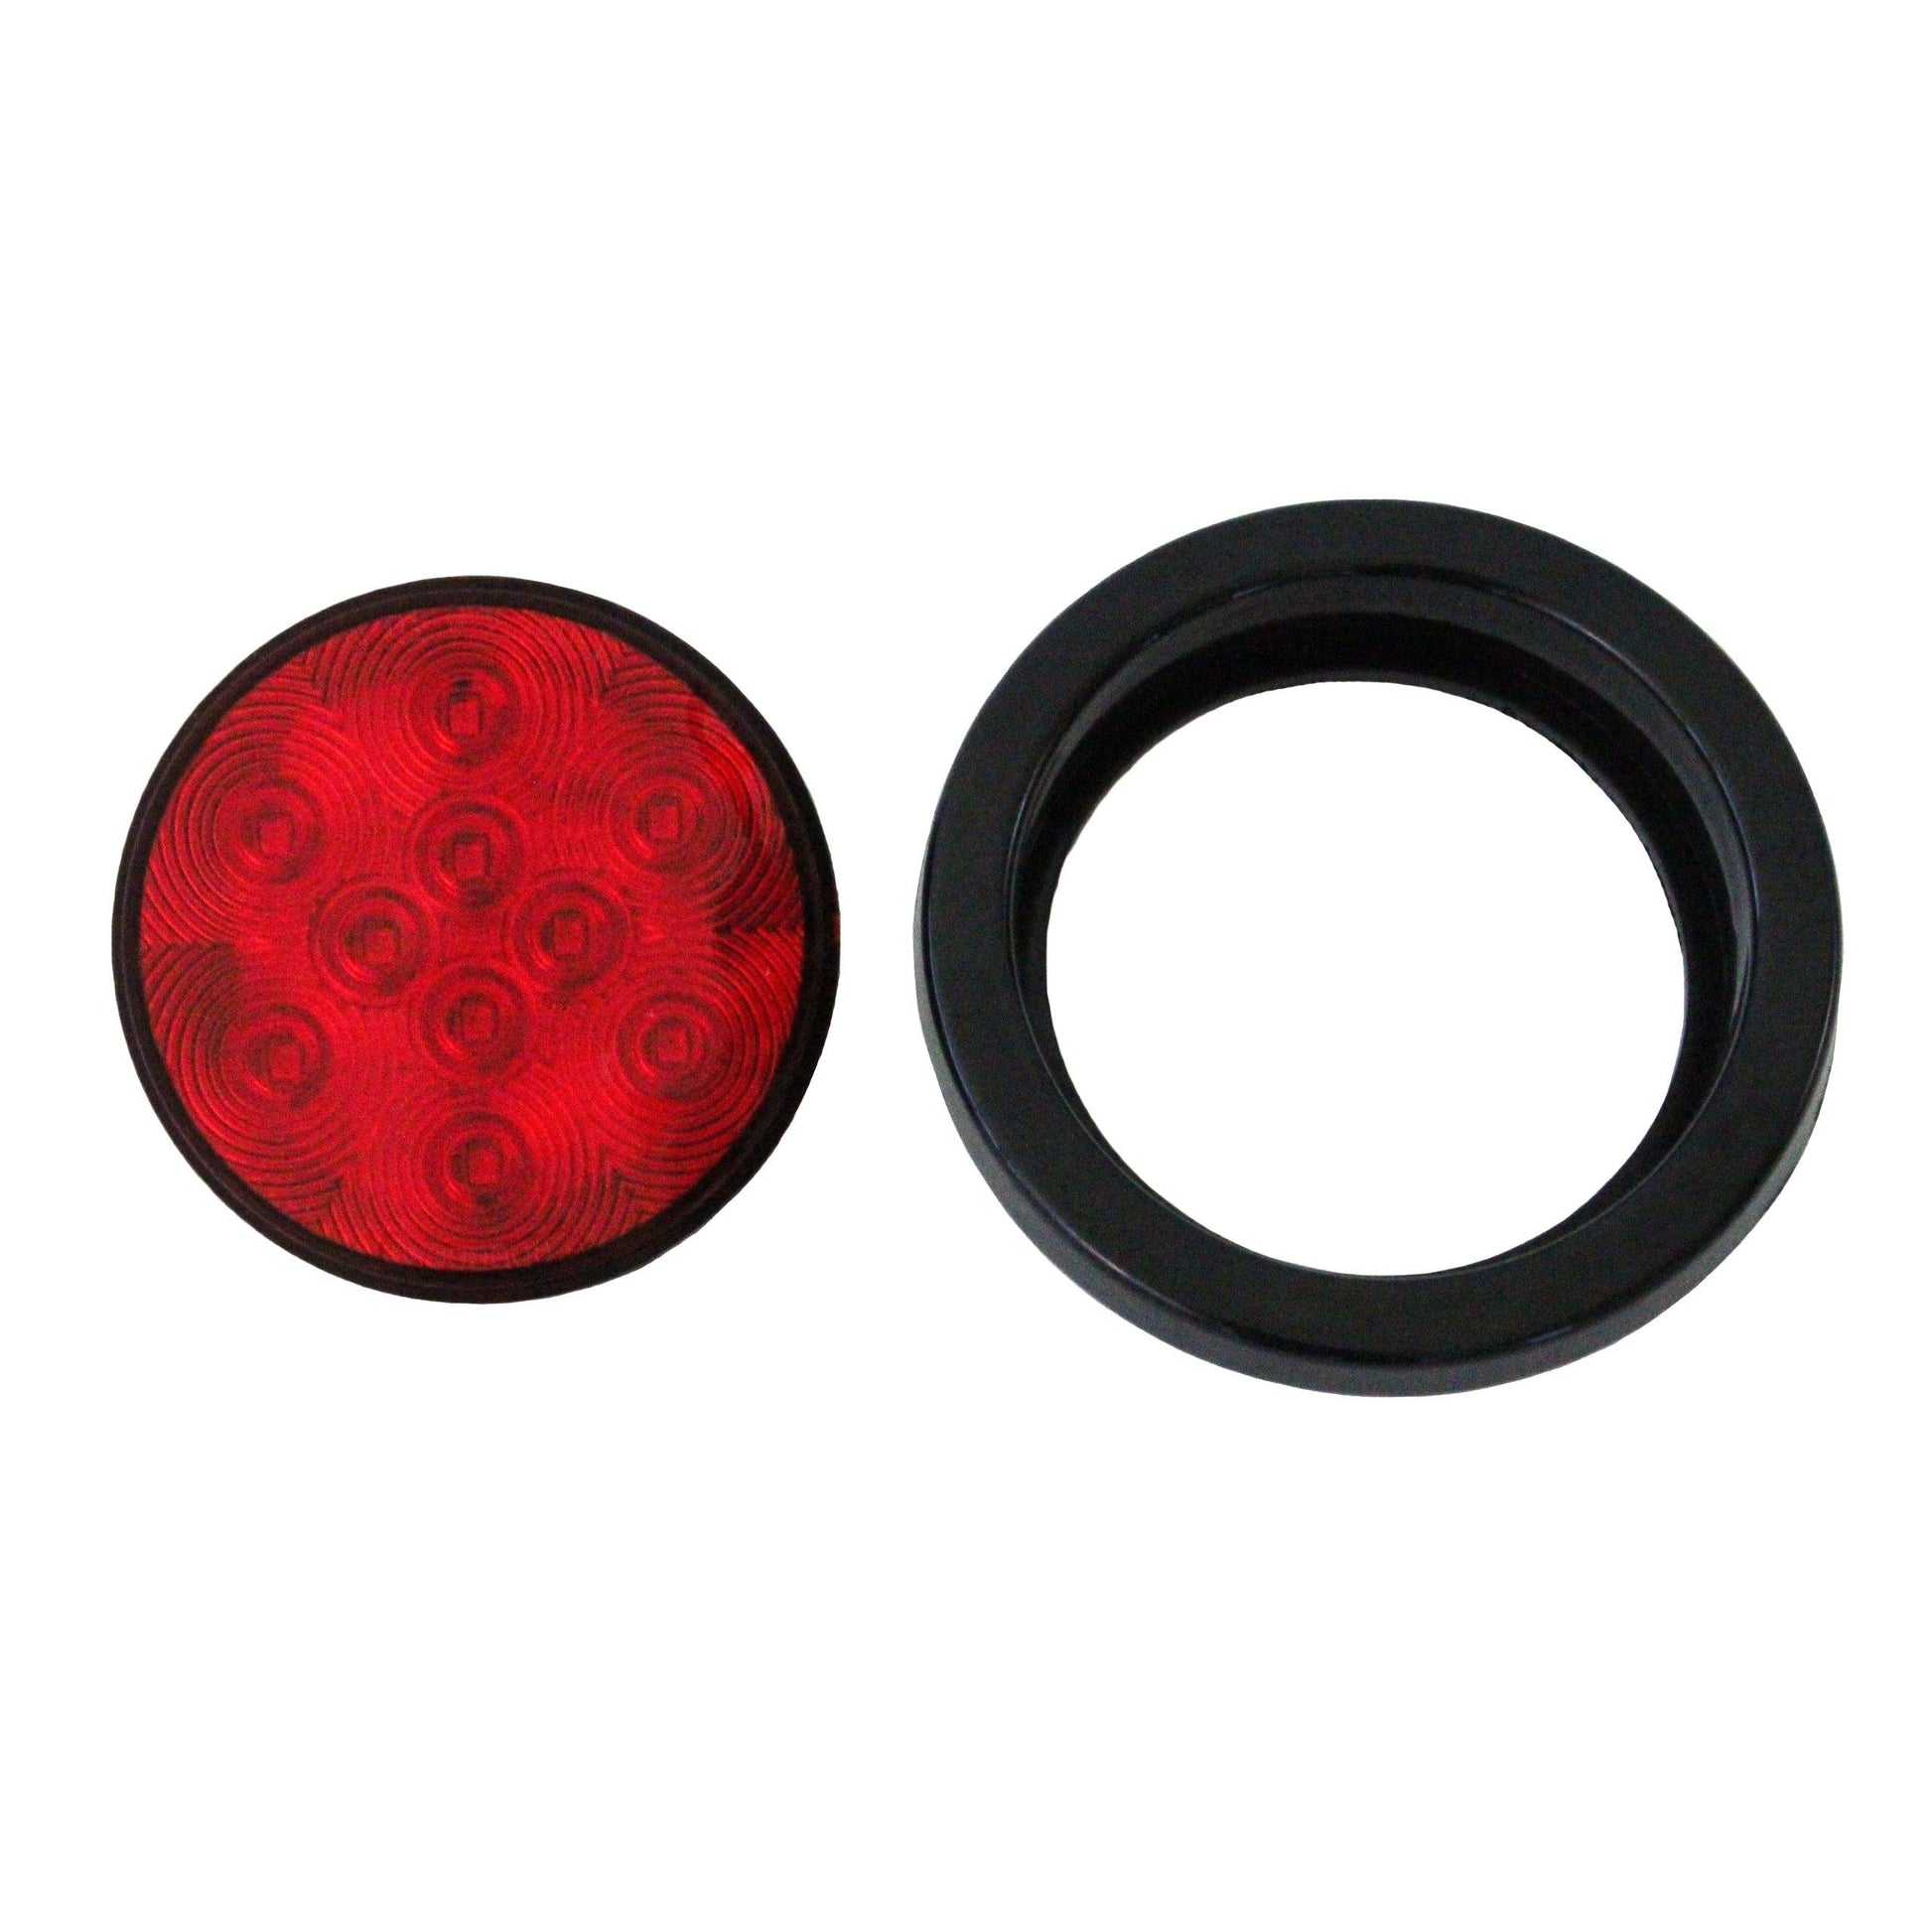 10 LED 4 Inch Trailer Tail Light in Red - Boxer Tools